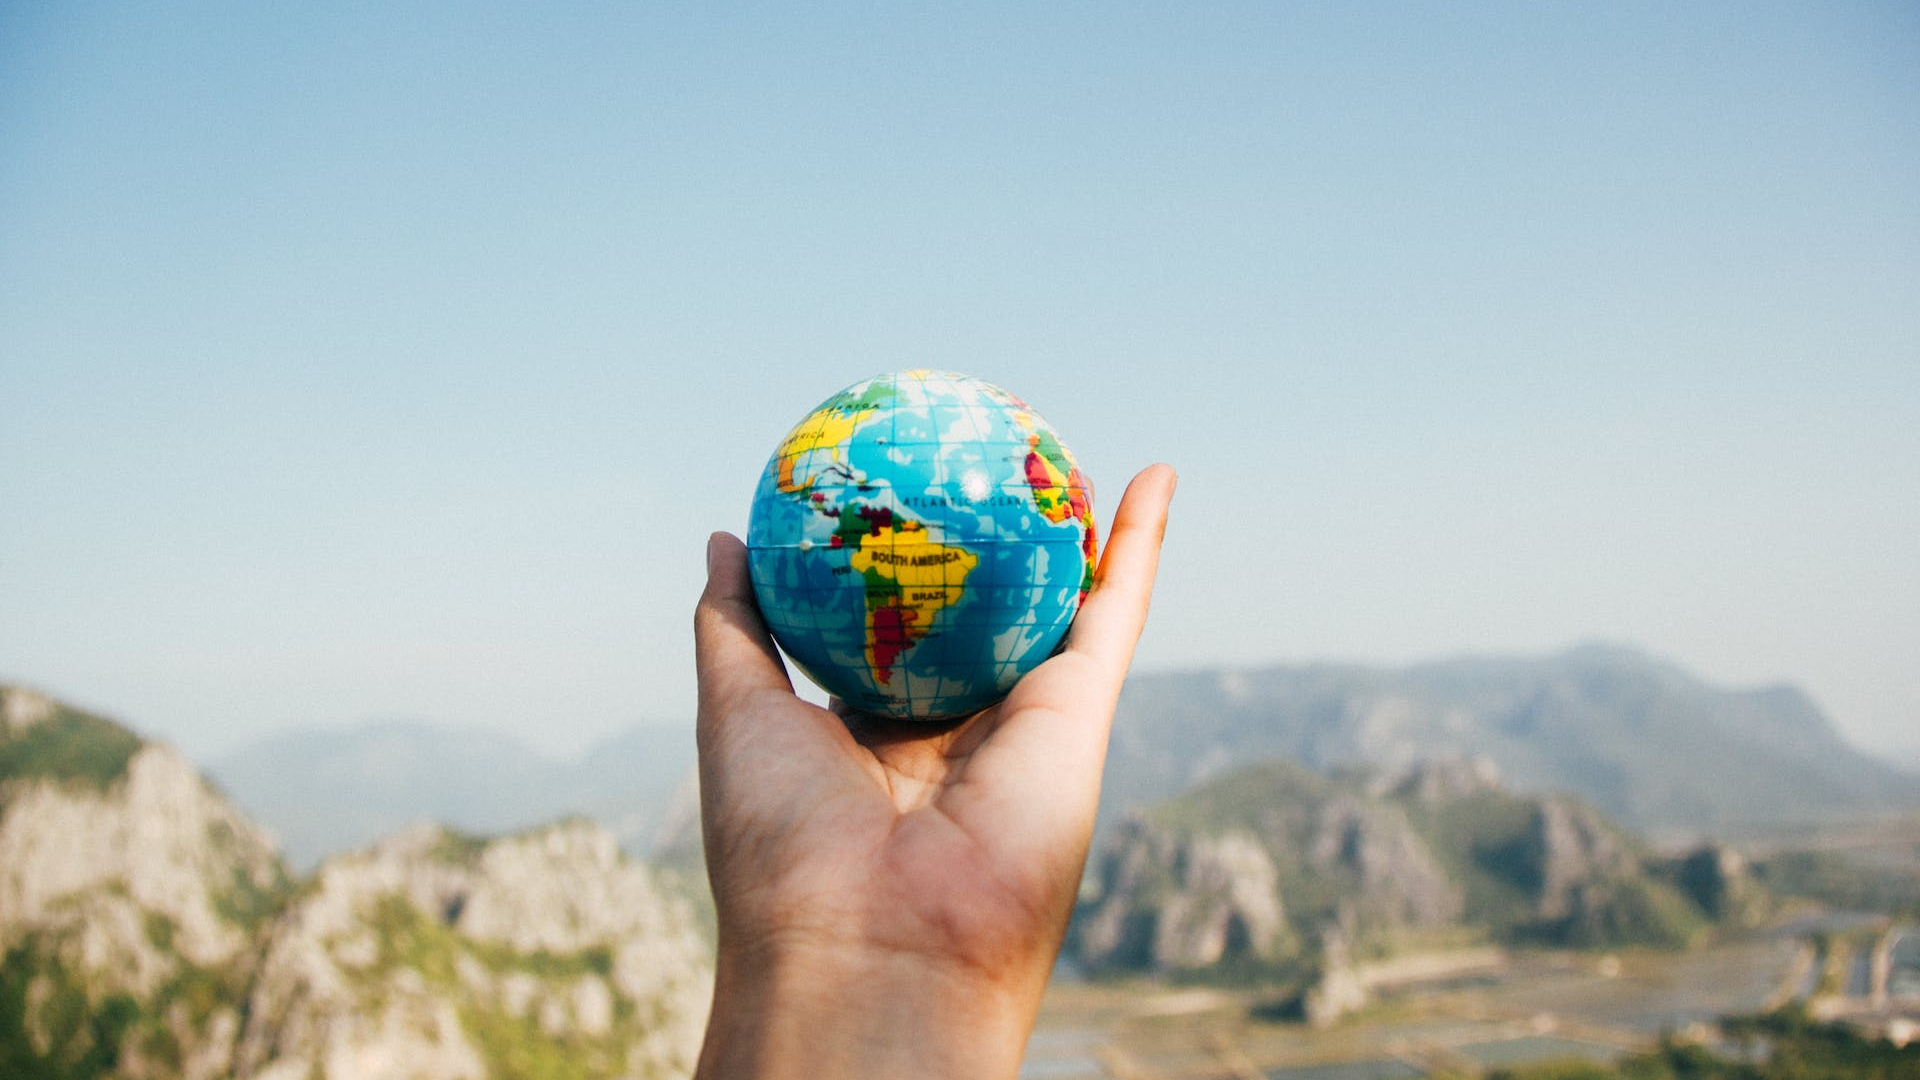 A hand holds up a toy globe in front of a mountainous background